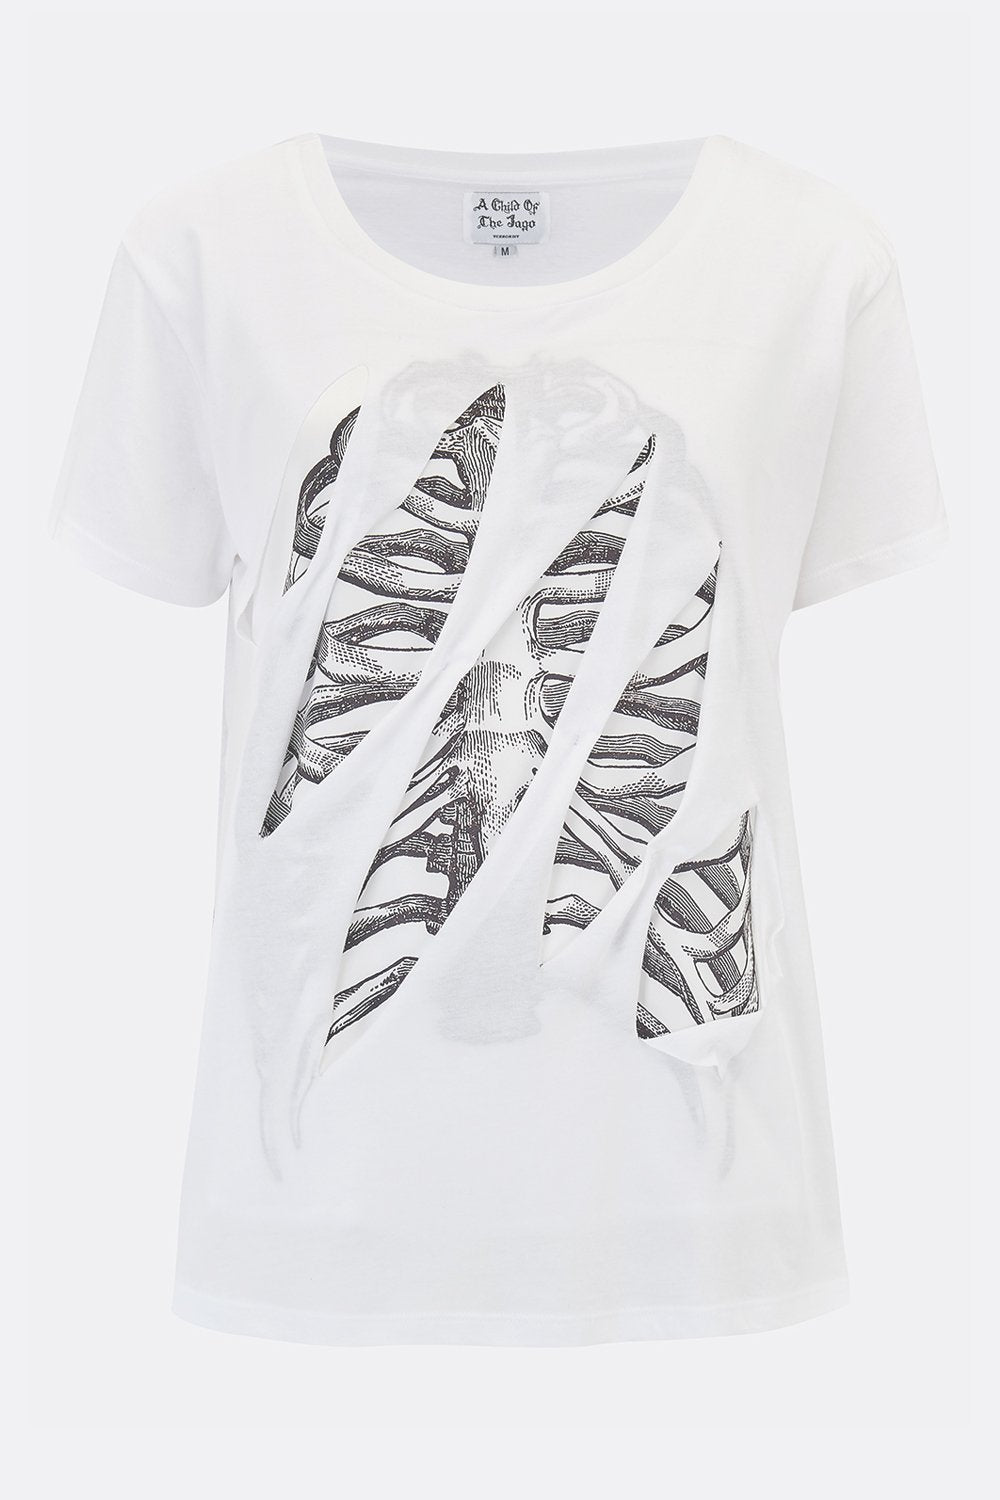 WOMEN&#39;S GIBBET WHITE TEE SHIRT-T shirts-A Child Of The Jago